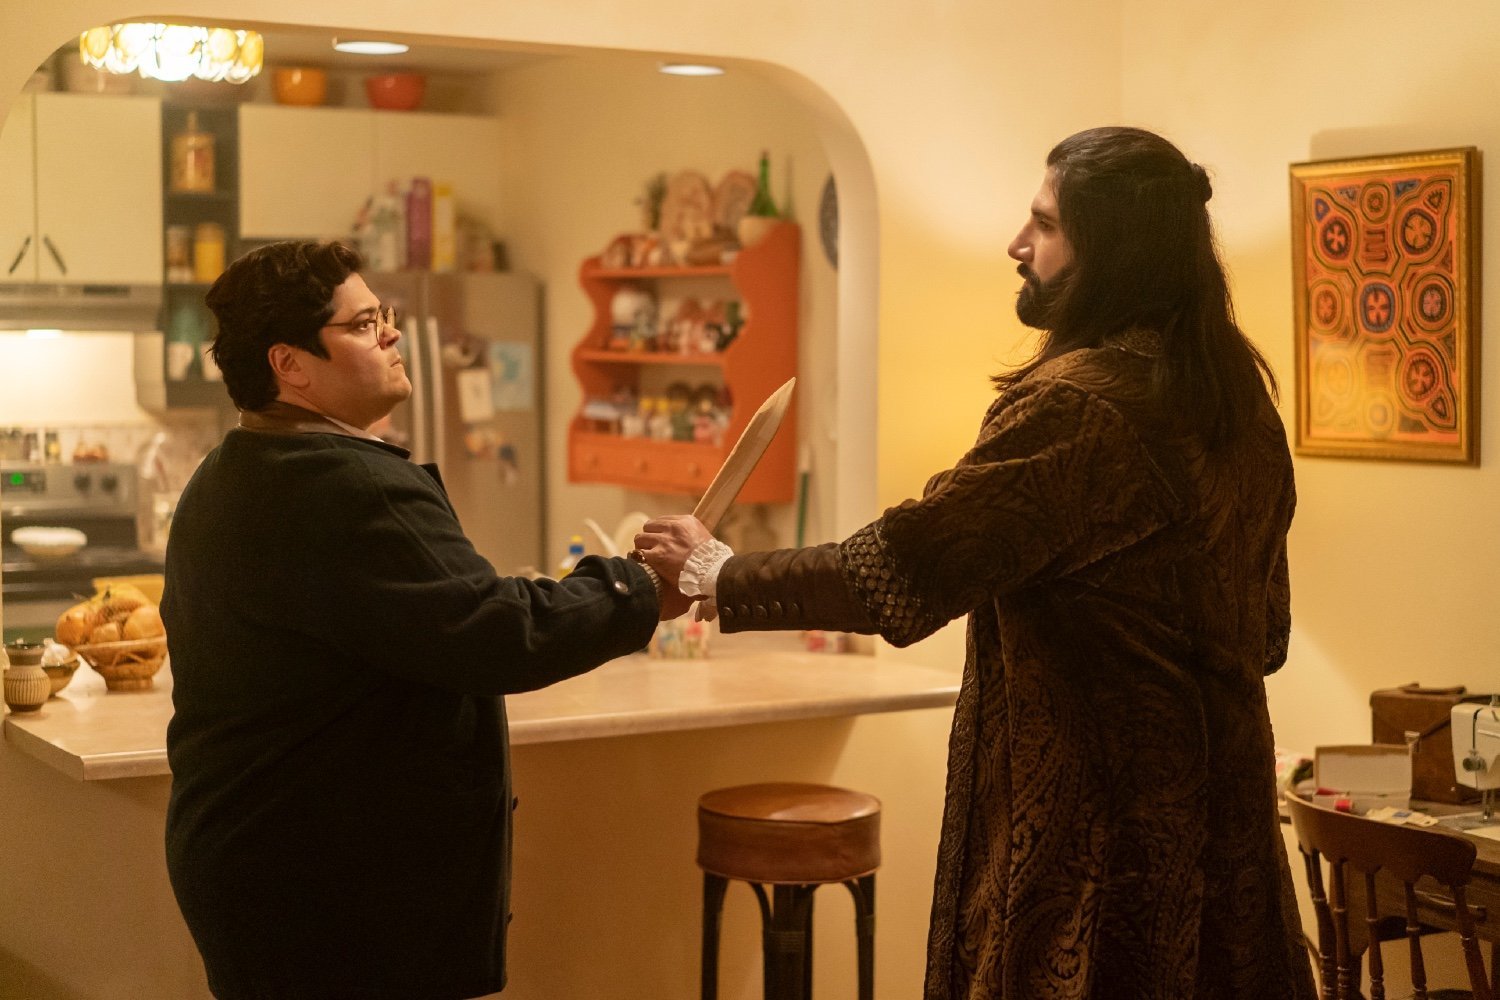 What We Do in the Shadows Teases Its Upcoming Final Season